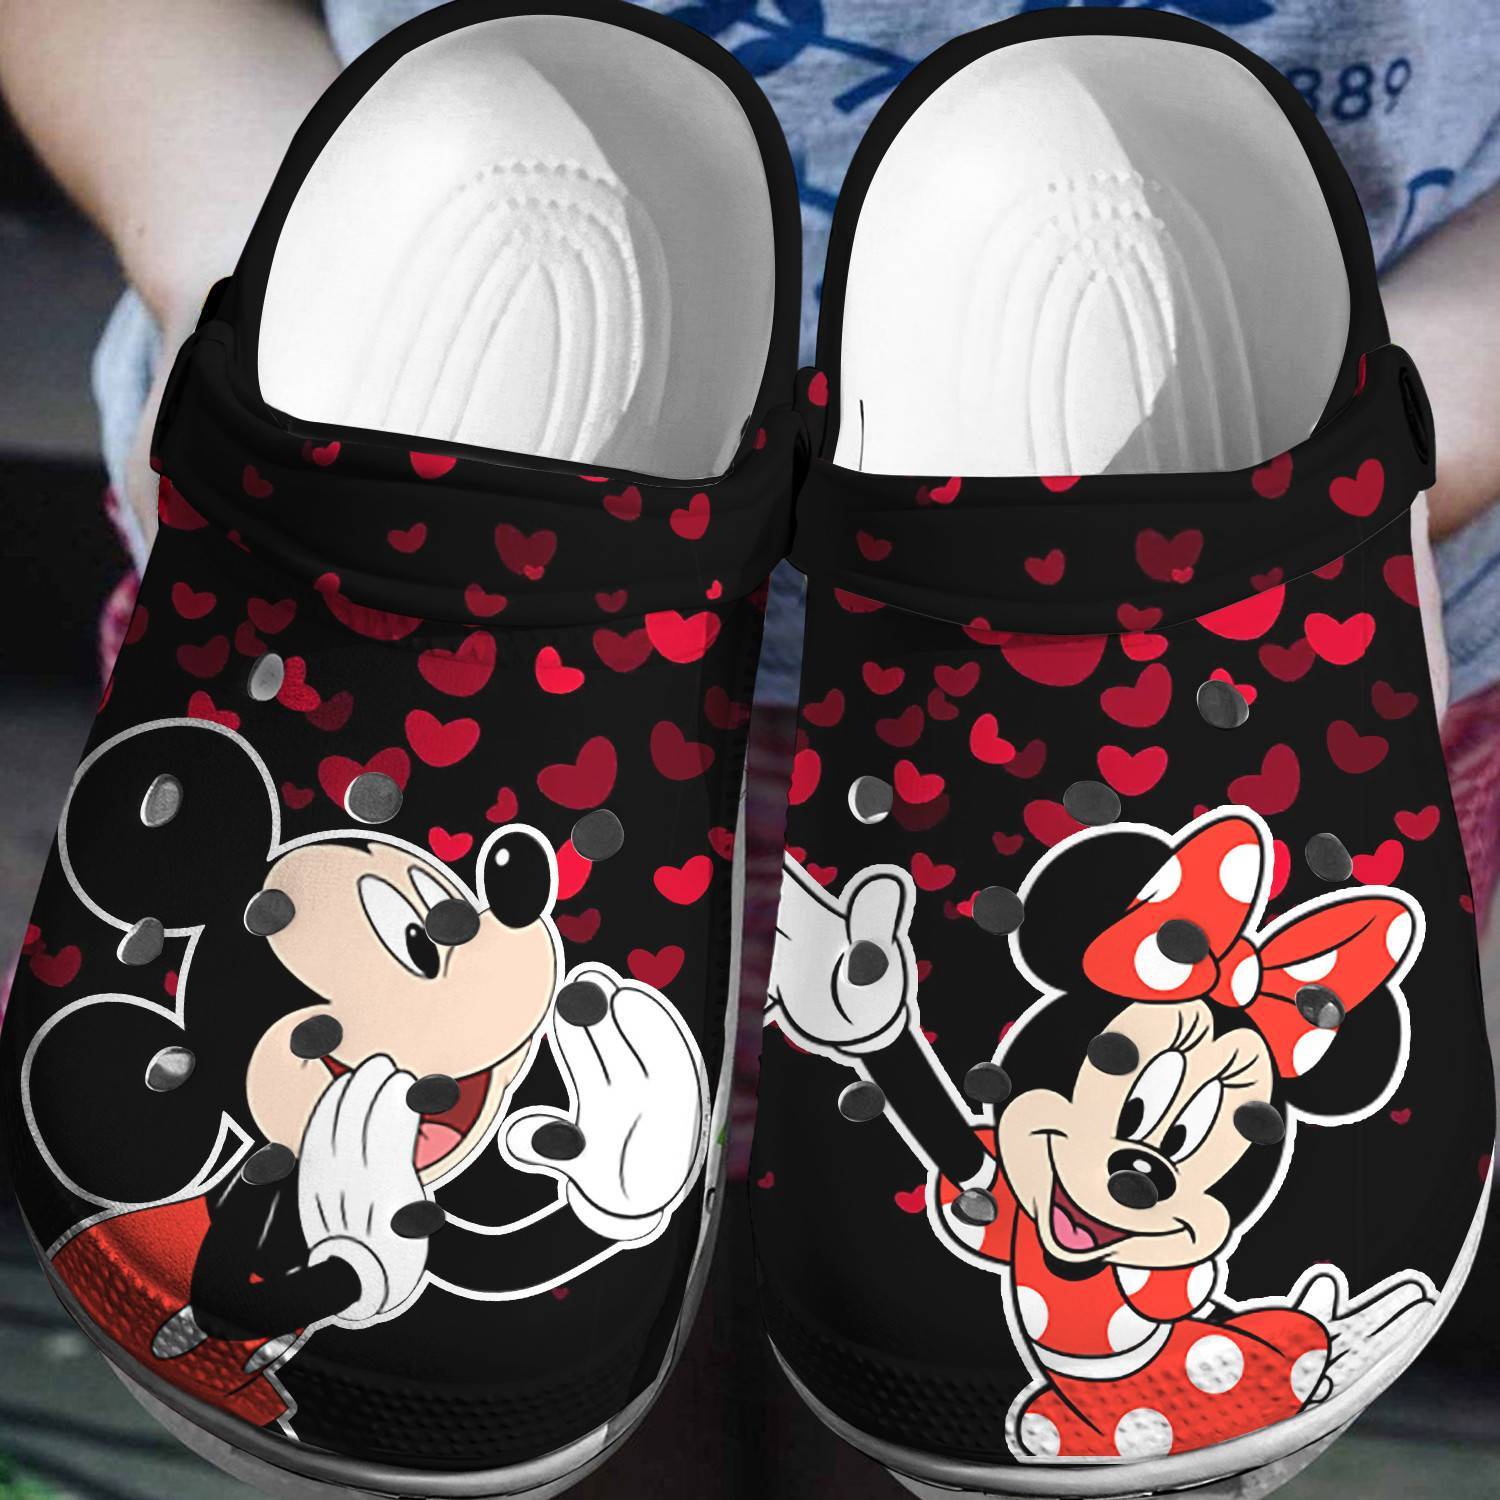 Iconic Duo: Mickey Minnie Crocs 3D Clog Shoes – Embrace the Disney Spirit